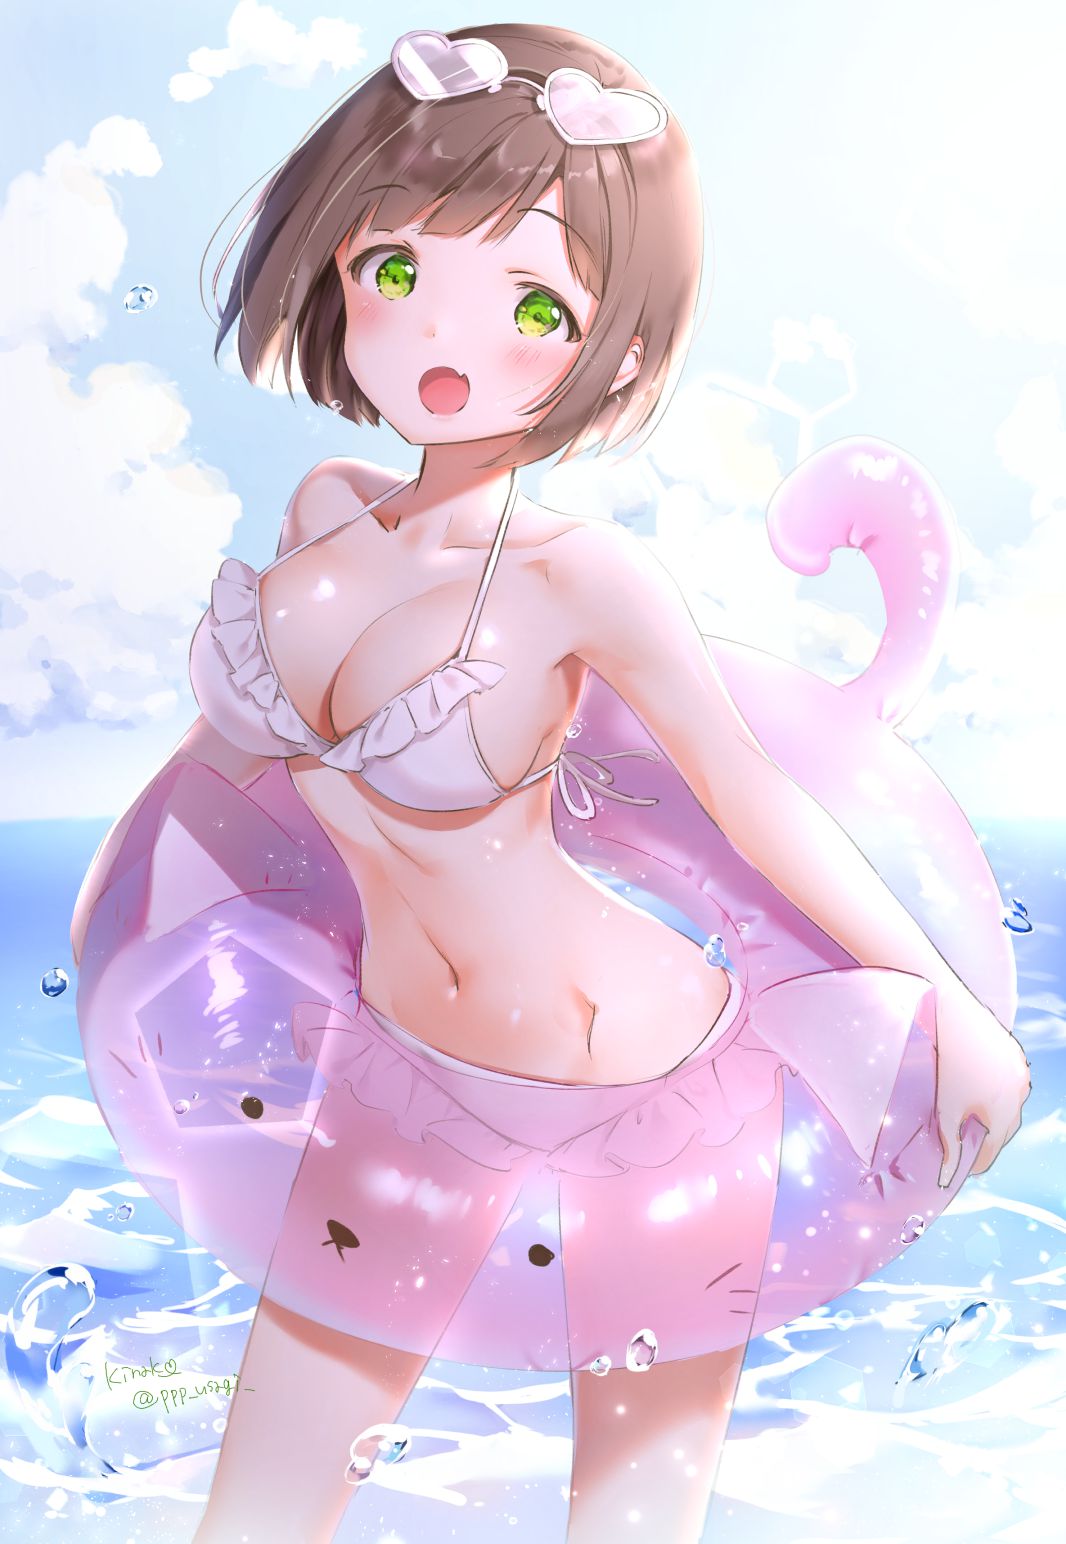 [Secondary] Moe images of swimsuit girls bathing in the sea and swimming pool 18